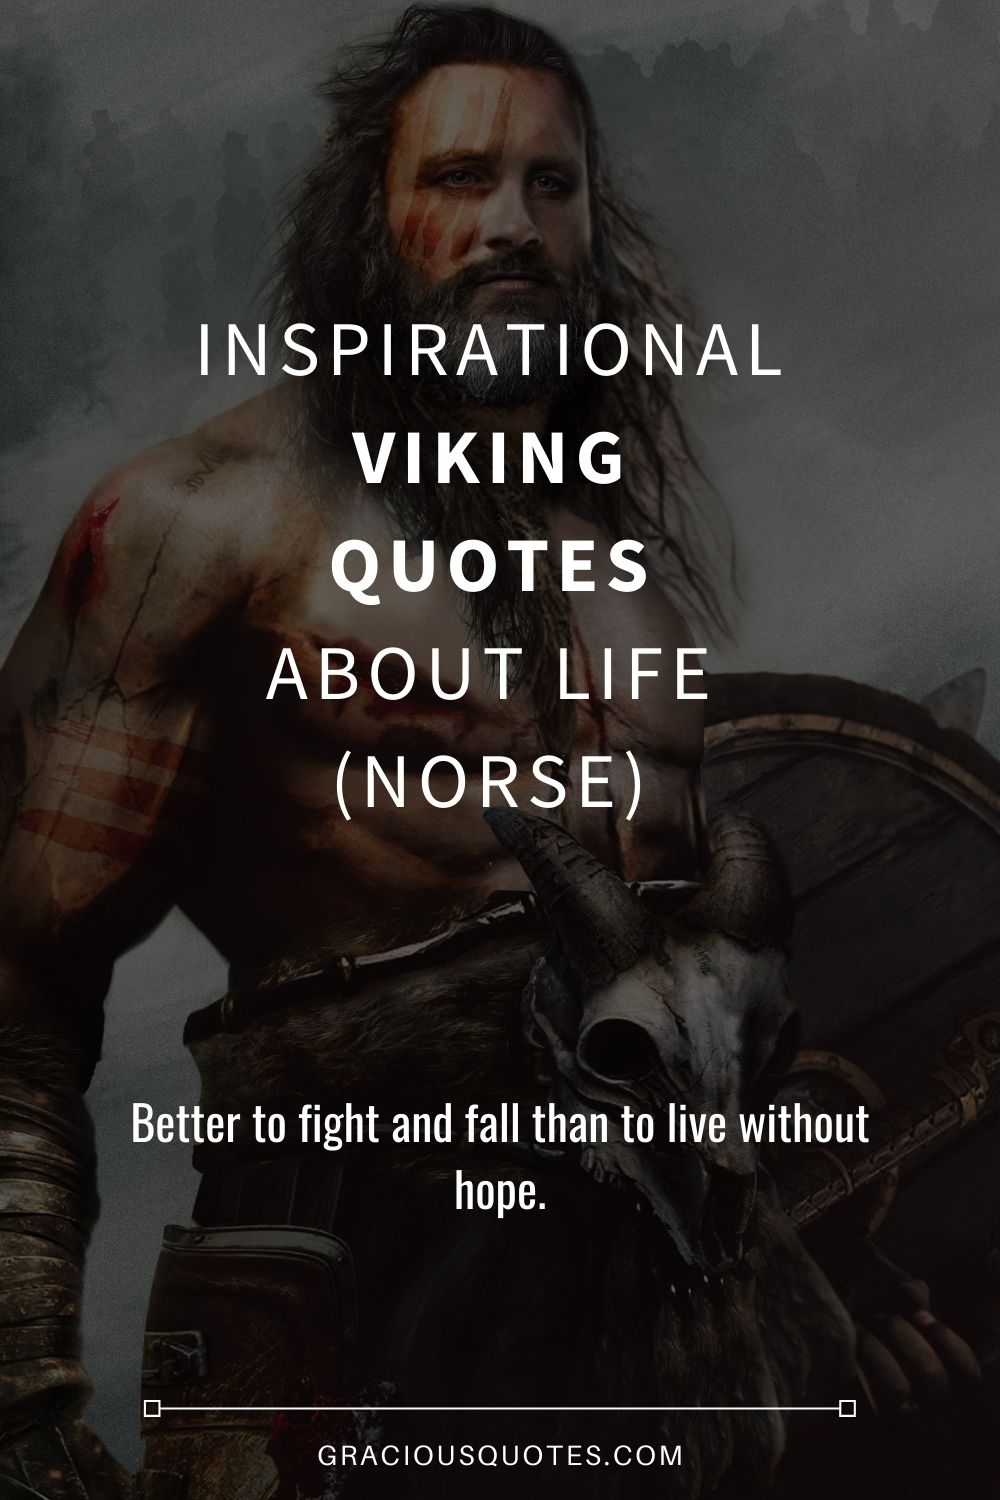 Inspirational Viking Quotes About Life (NORSE) - Gracious Quotes